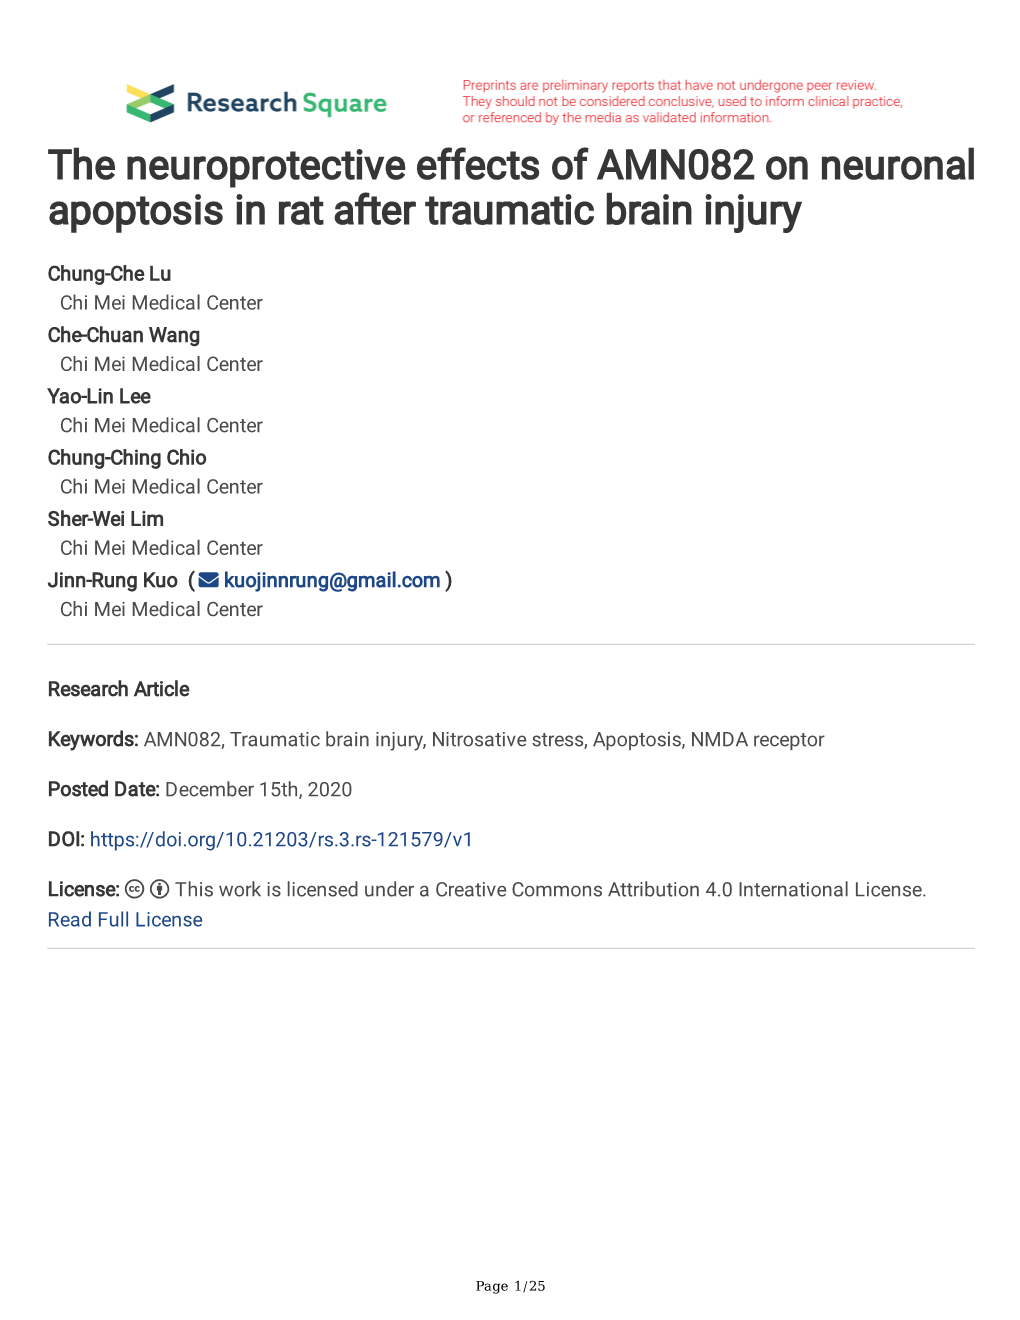 The Neuroprotective Effects of AMN082 on Neuronal Apoptosis in Rat After Traumatic Brain Injury